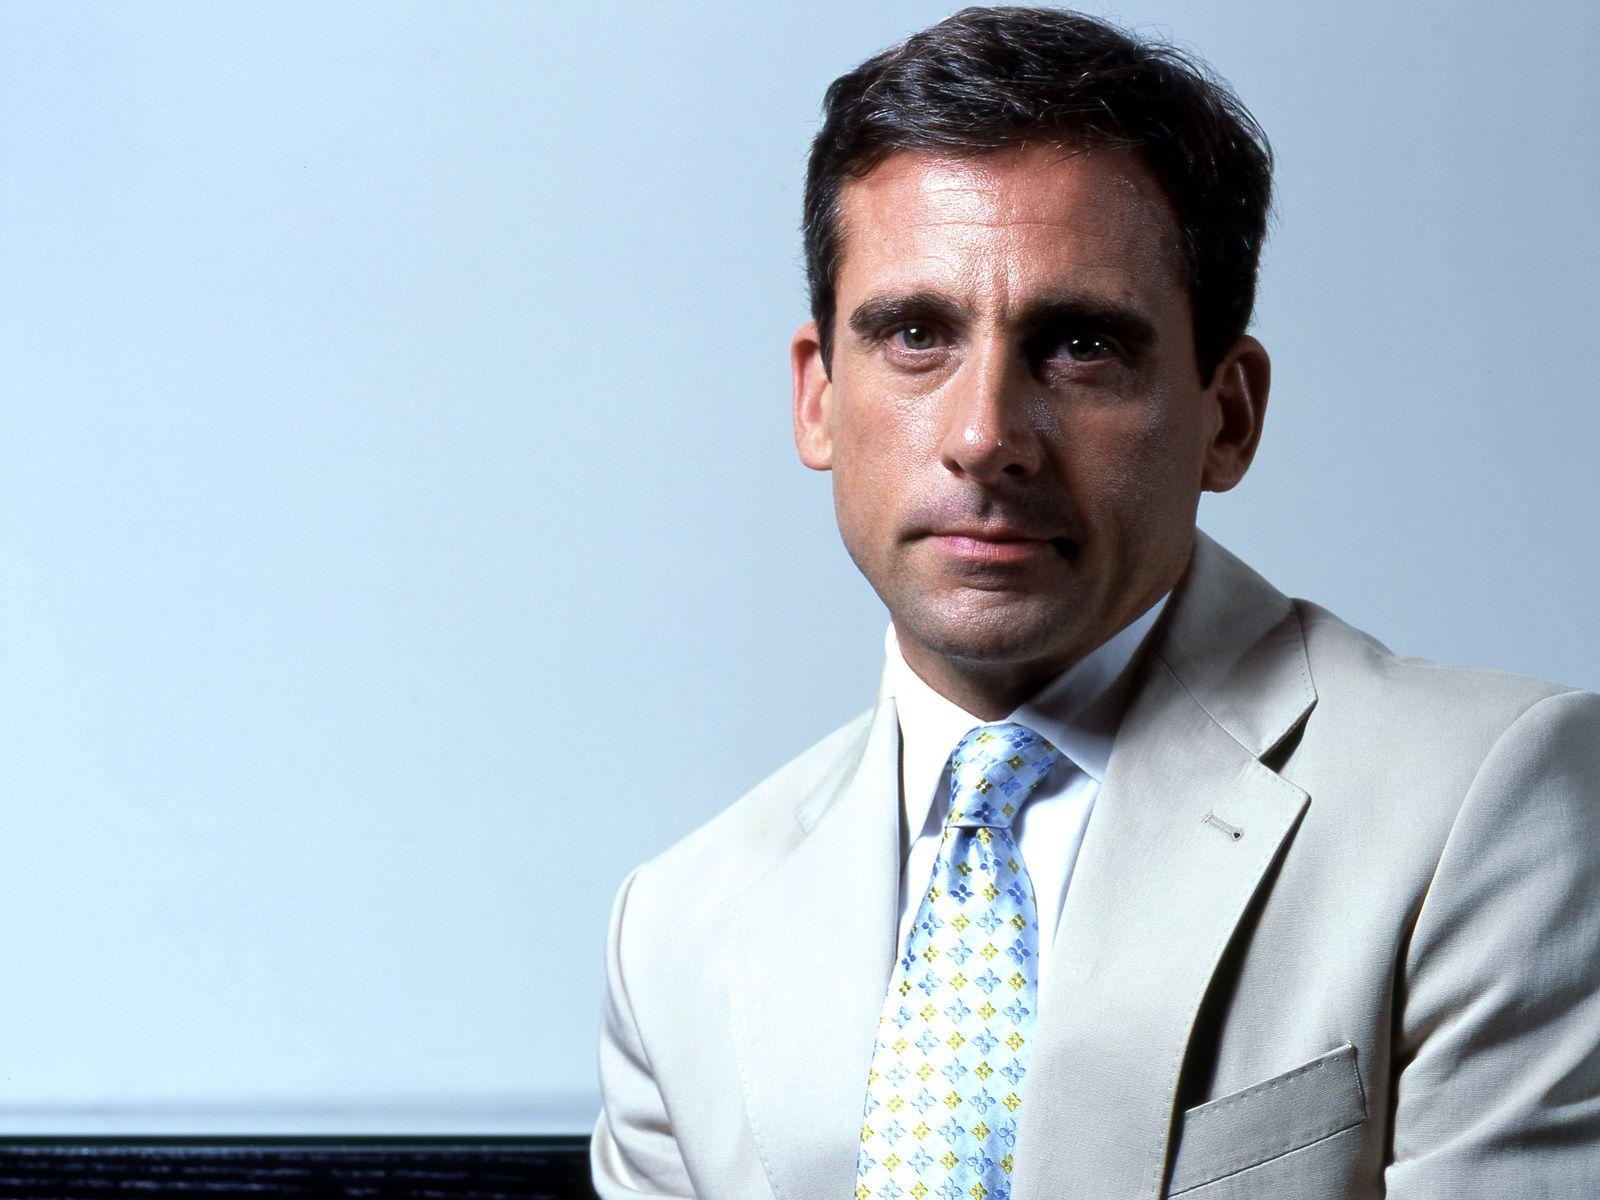 Steve Carell Wallpaper and Background Imagex1200